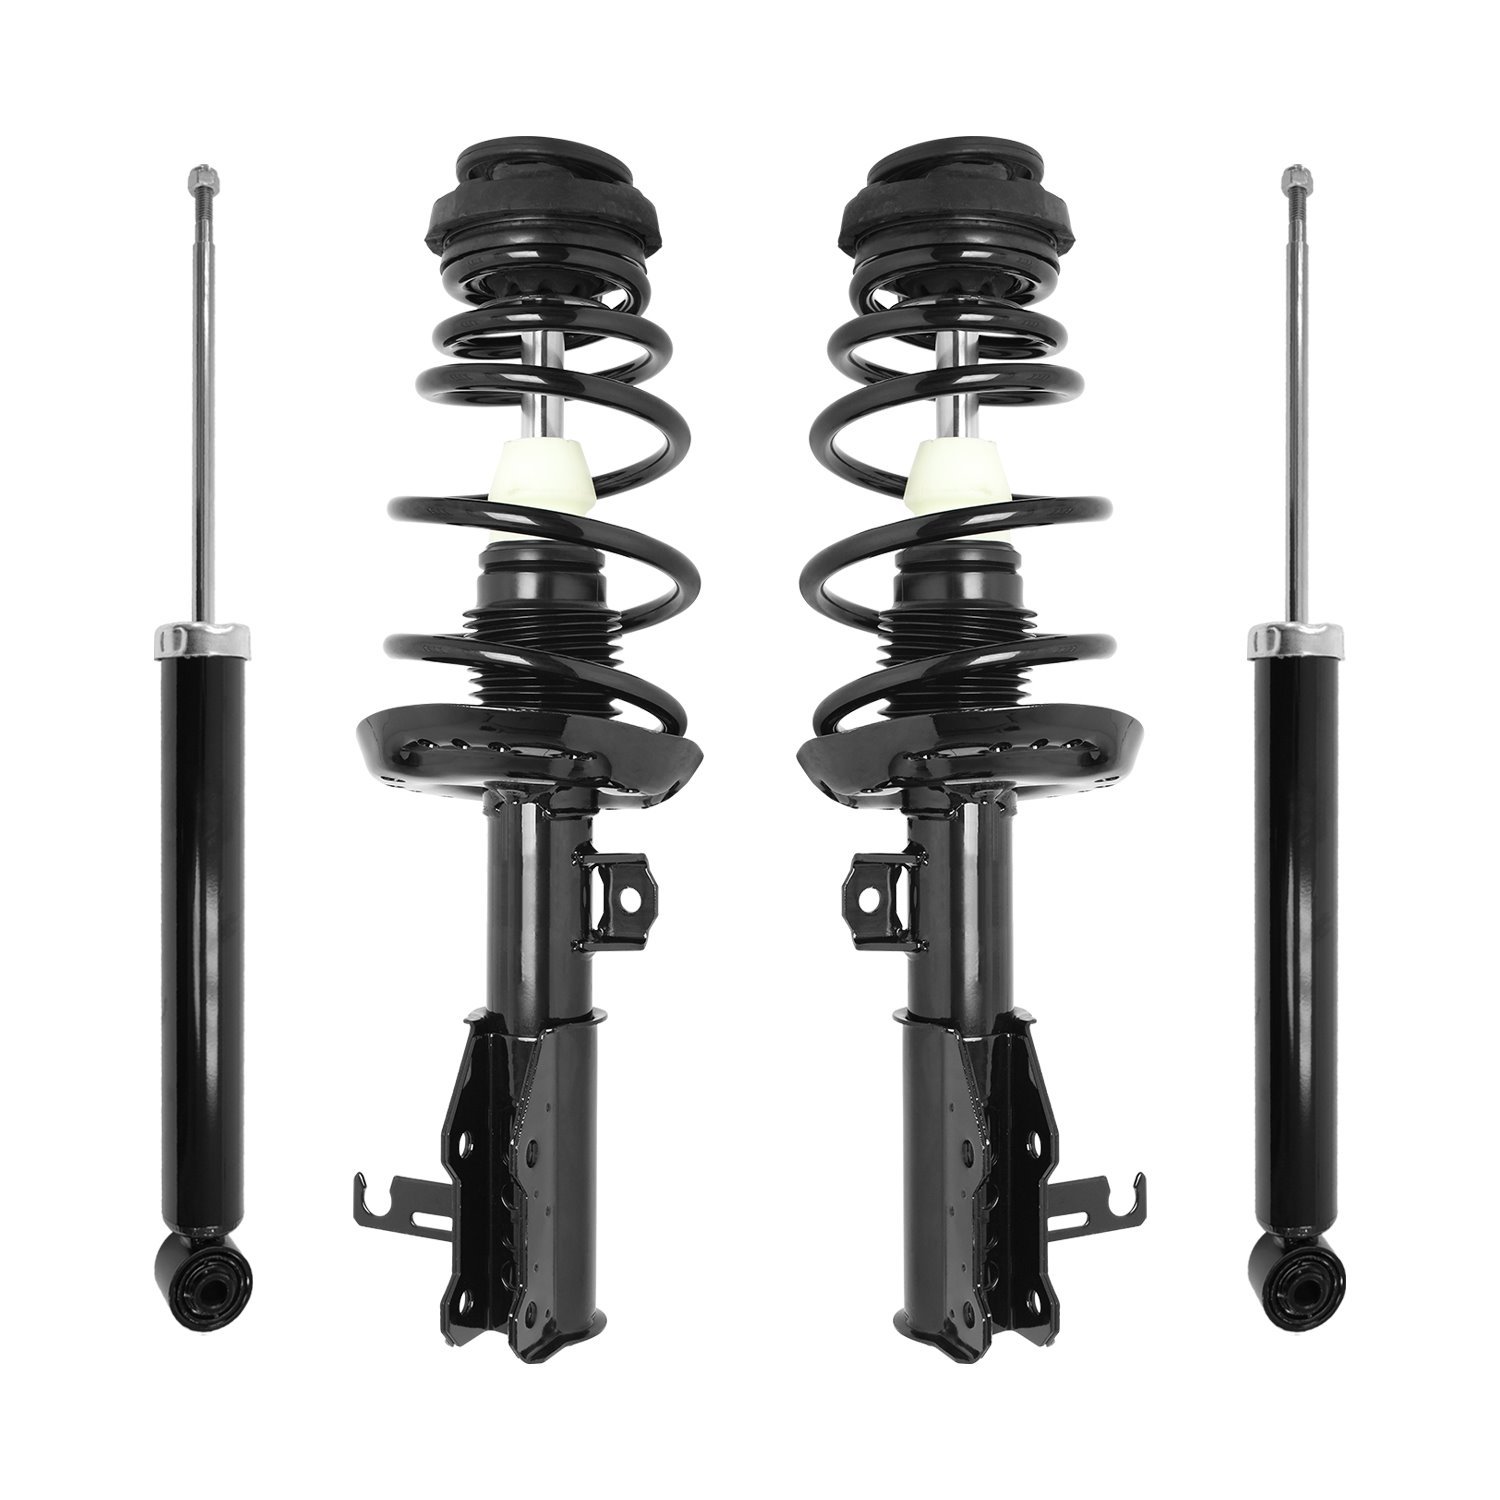 4-11027-251340-001 Front & Rear Suspension Strut & Coil Spring Assembly Fits Select Buick Regal